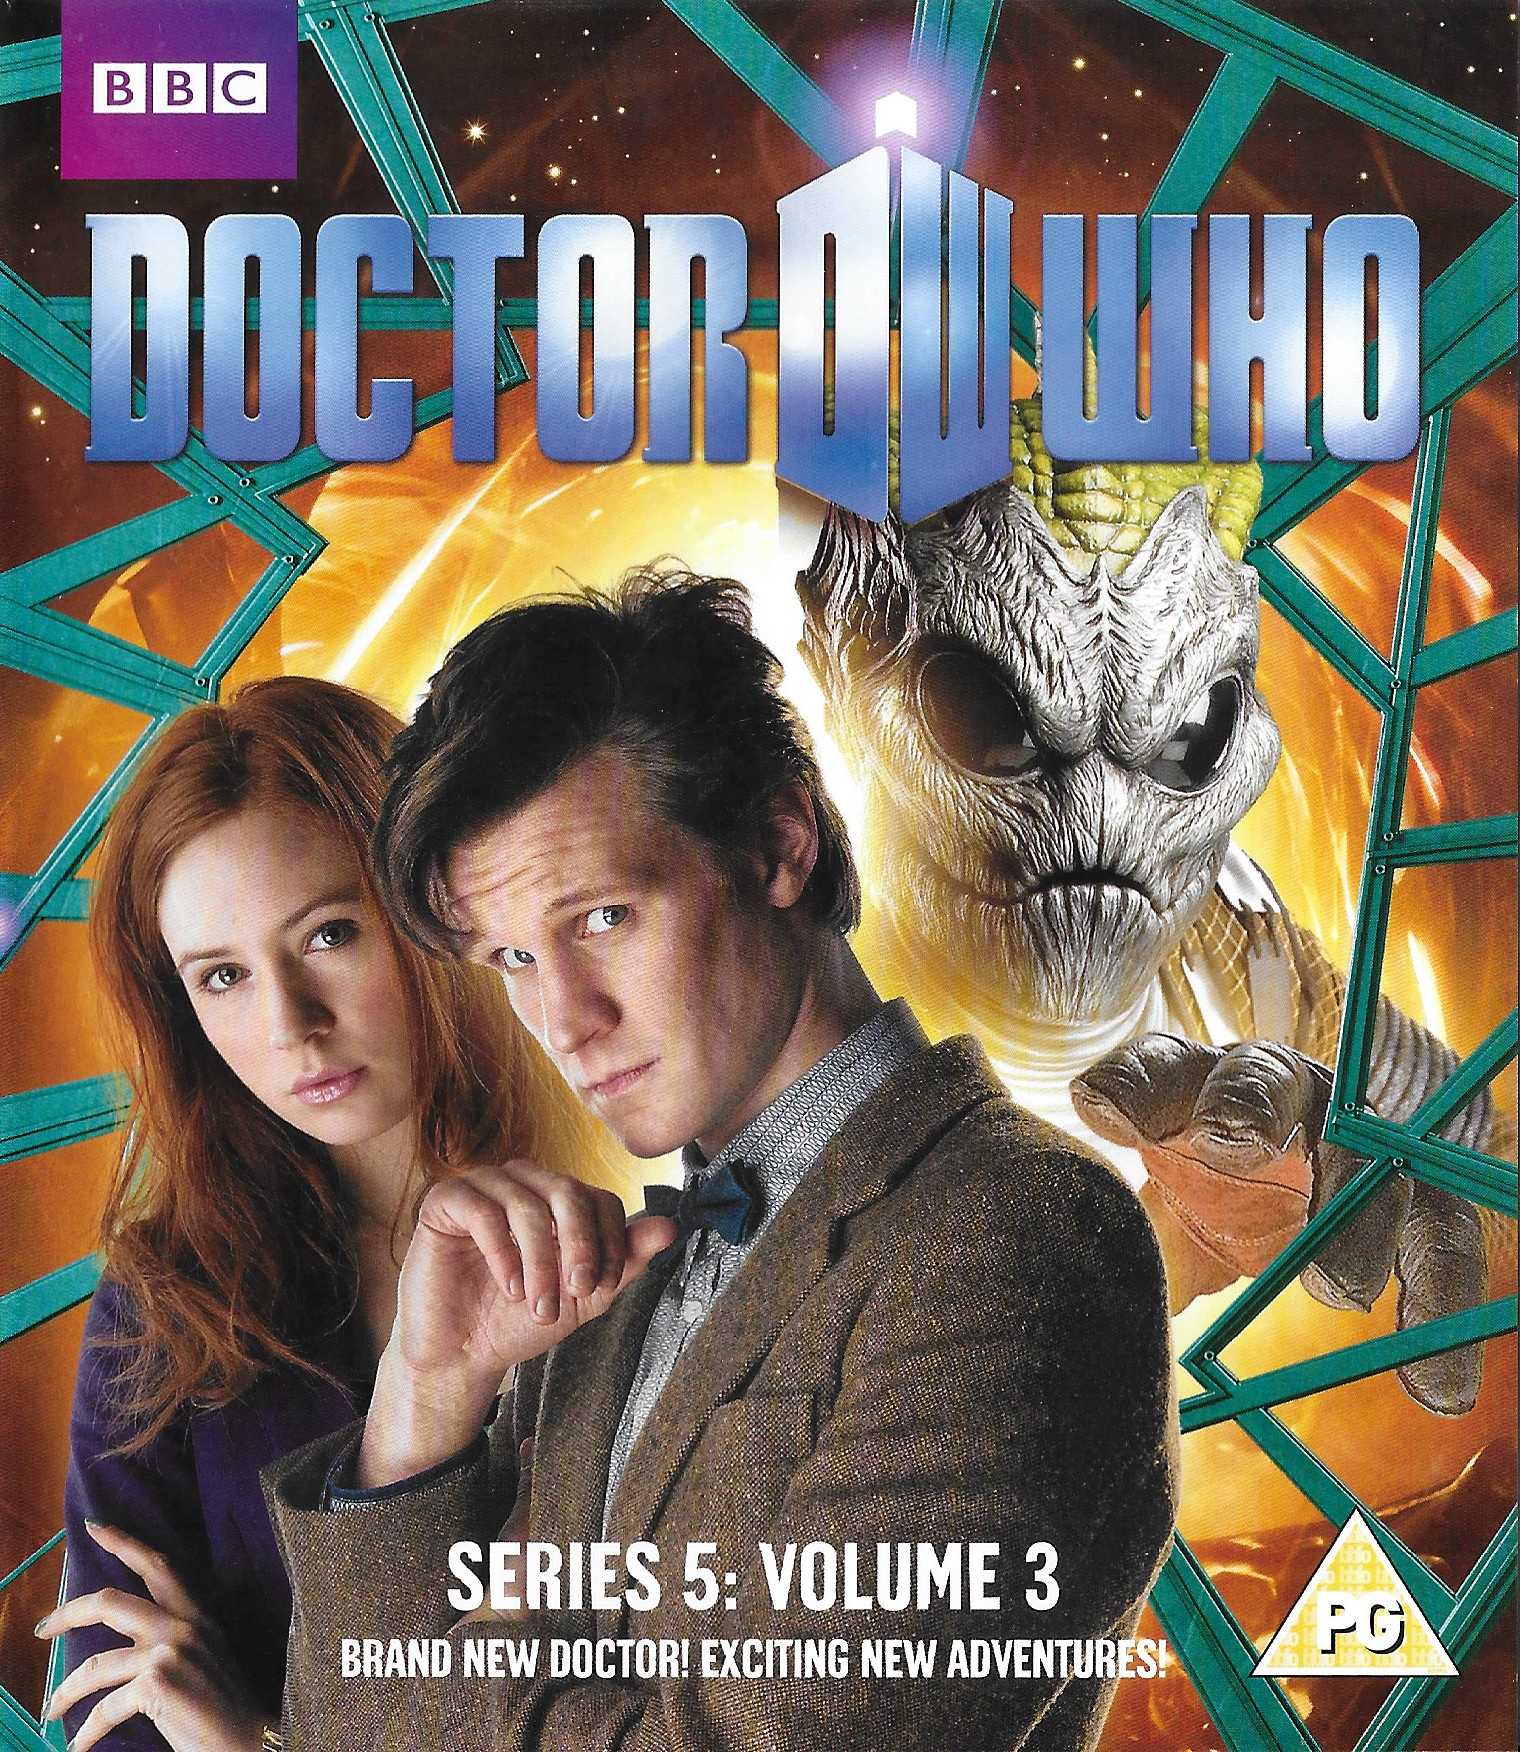 Picture of BBCBD 0084 Doctor Who - Series 5, volume 3 by artist Simon Nye / Chris Chibnall